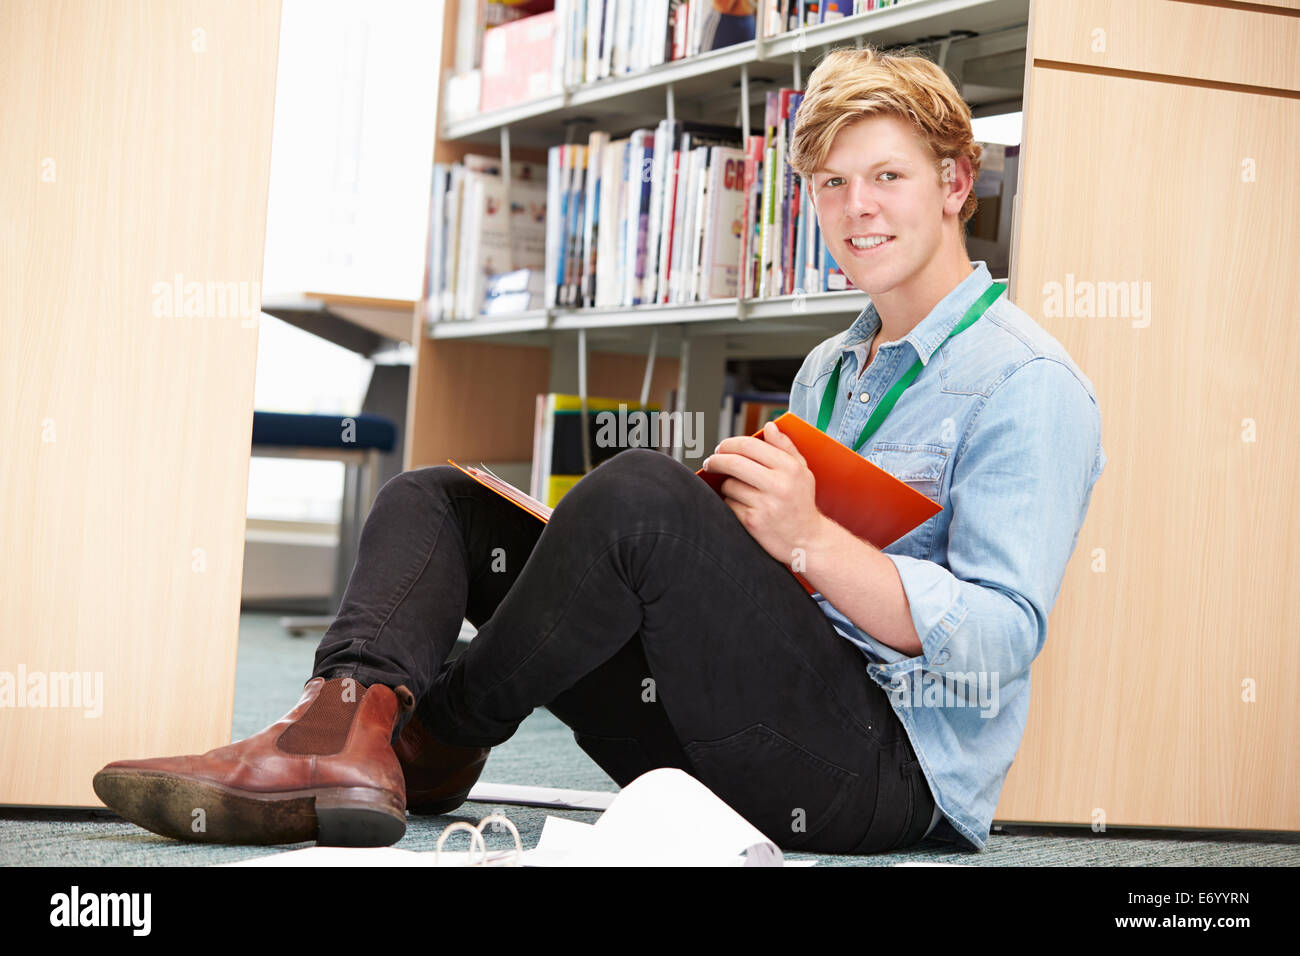 Male College Student Studying In Library Stock Photo